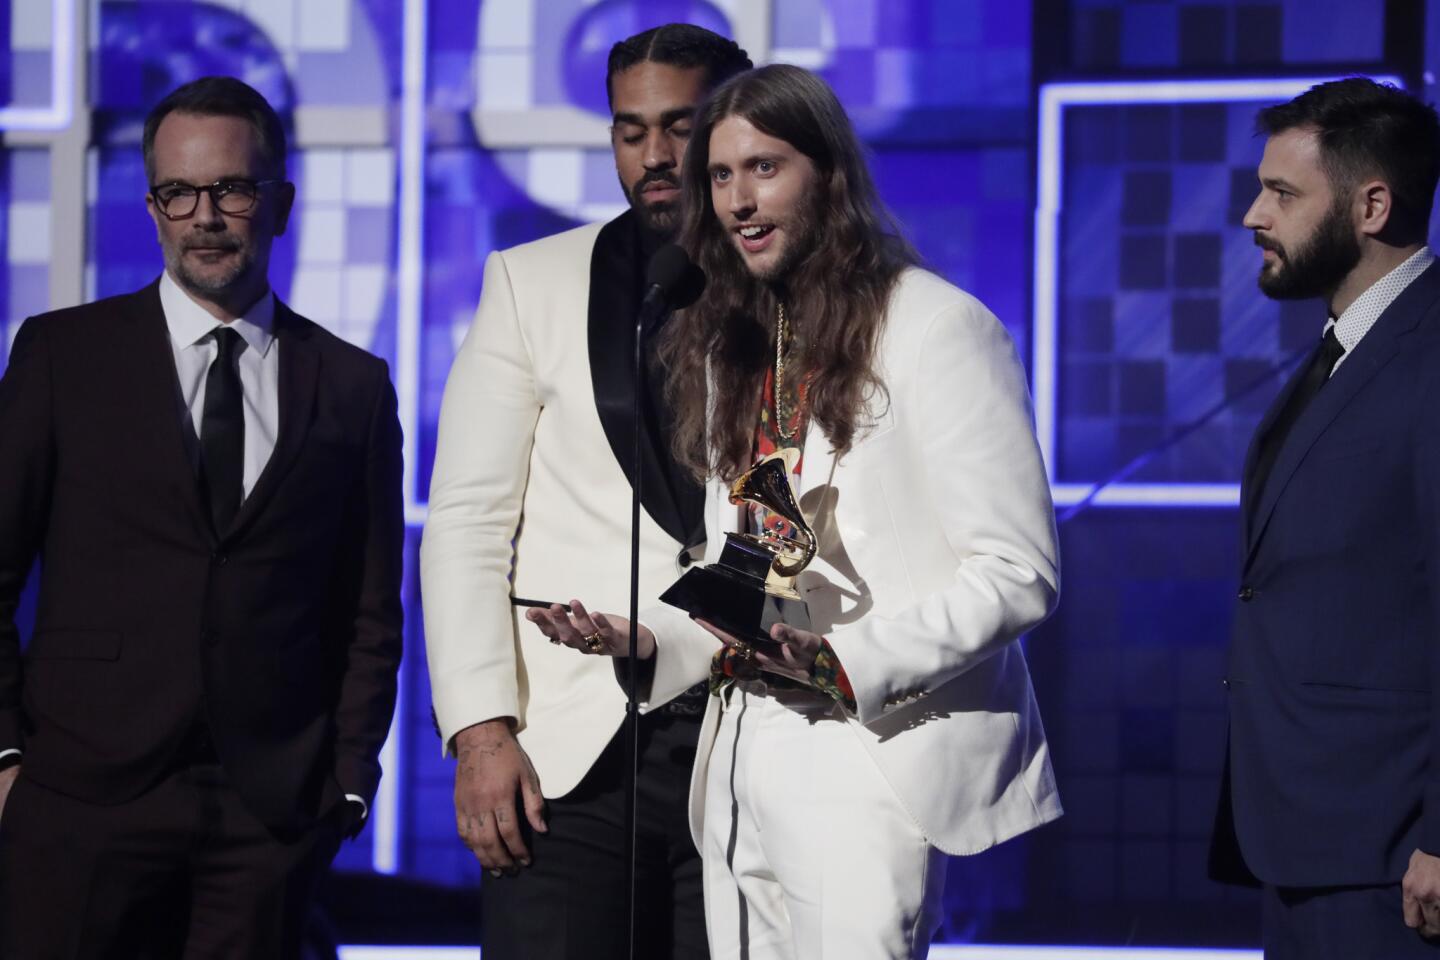 In the middle of the group, Derek Ali, left, and Ludwig Goransson, right, accept the record of the year award for "This Is America" at the 61st Grammy Awards at Staples Center in Los Angeles.